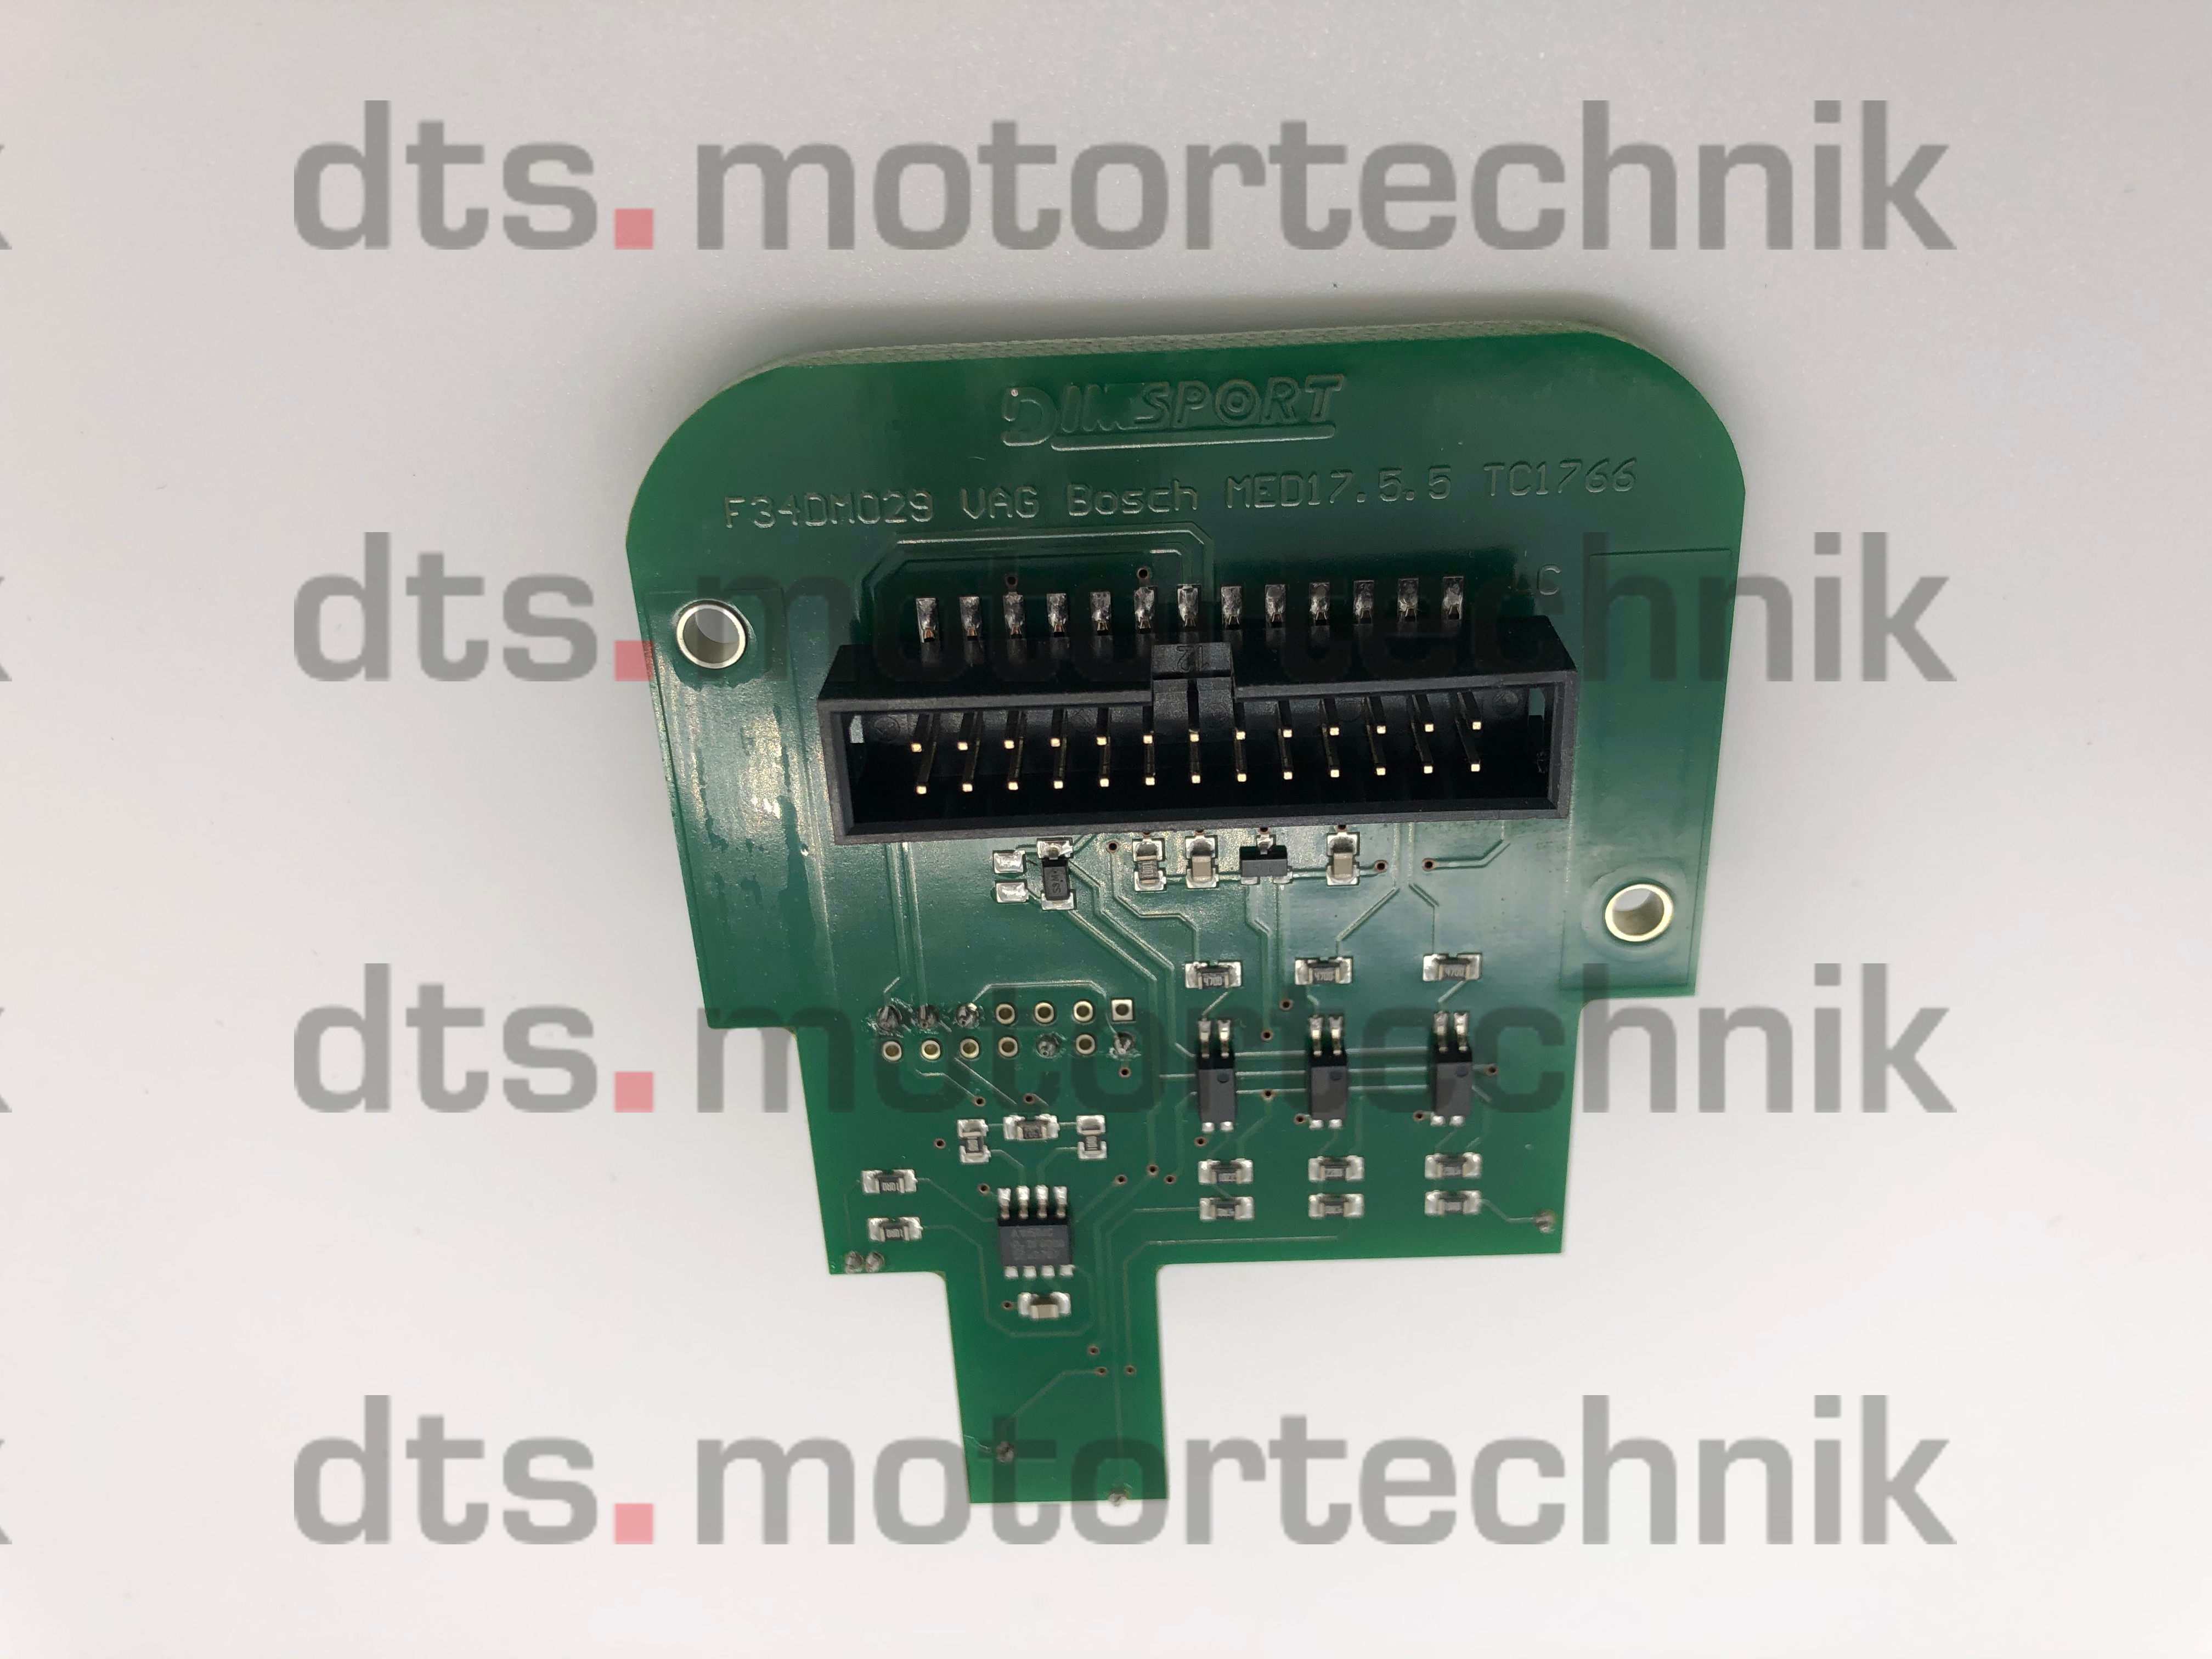 BOSCH MED17.5.5 (VAG GROUP) - INFINEON TRICORE CPU terminal adapter